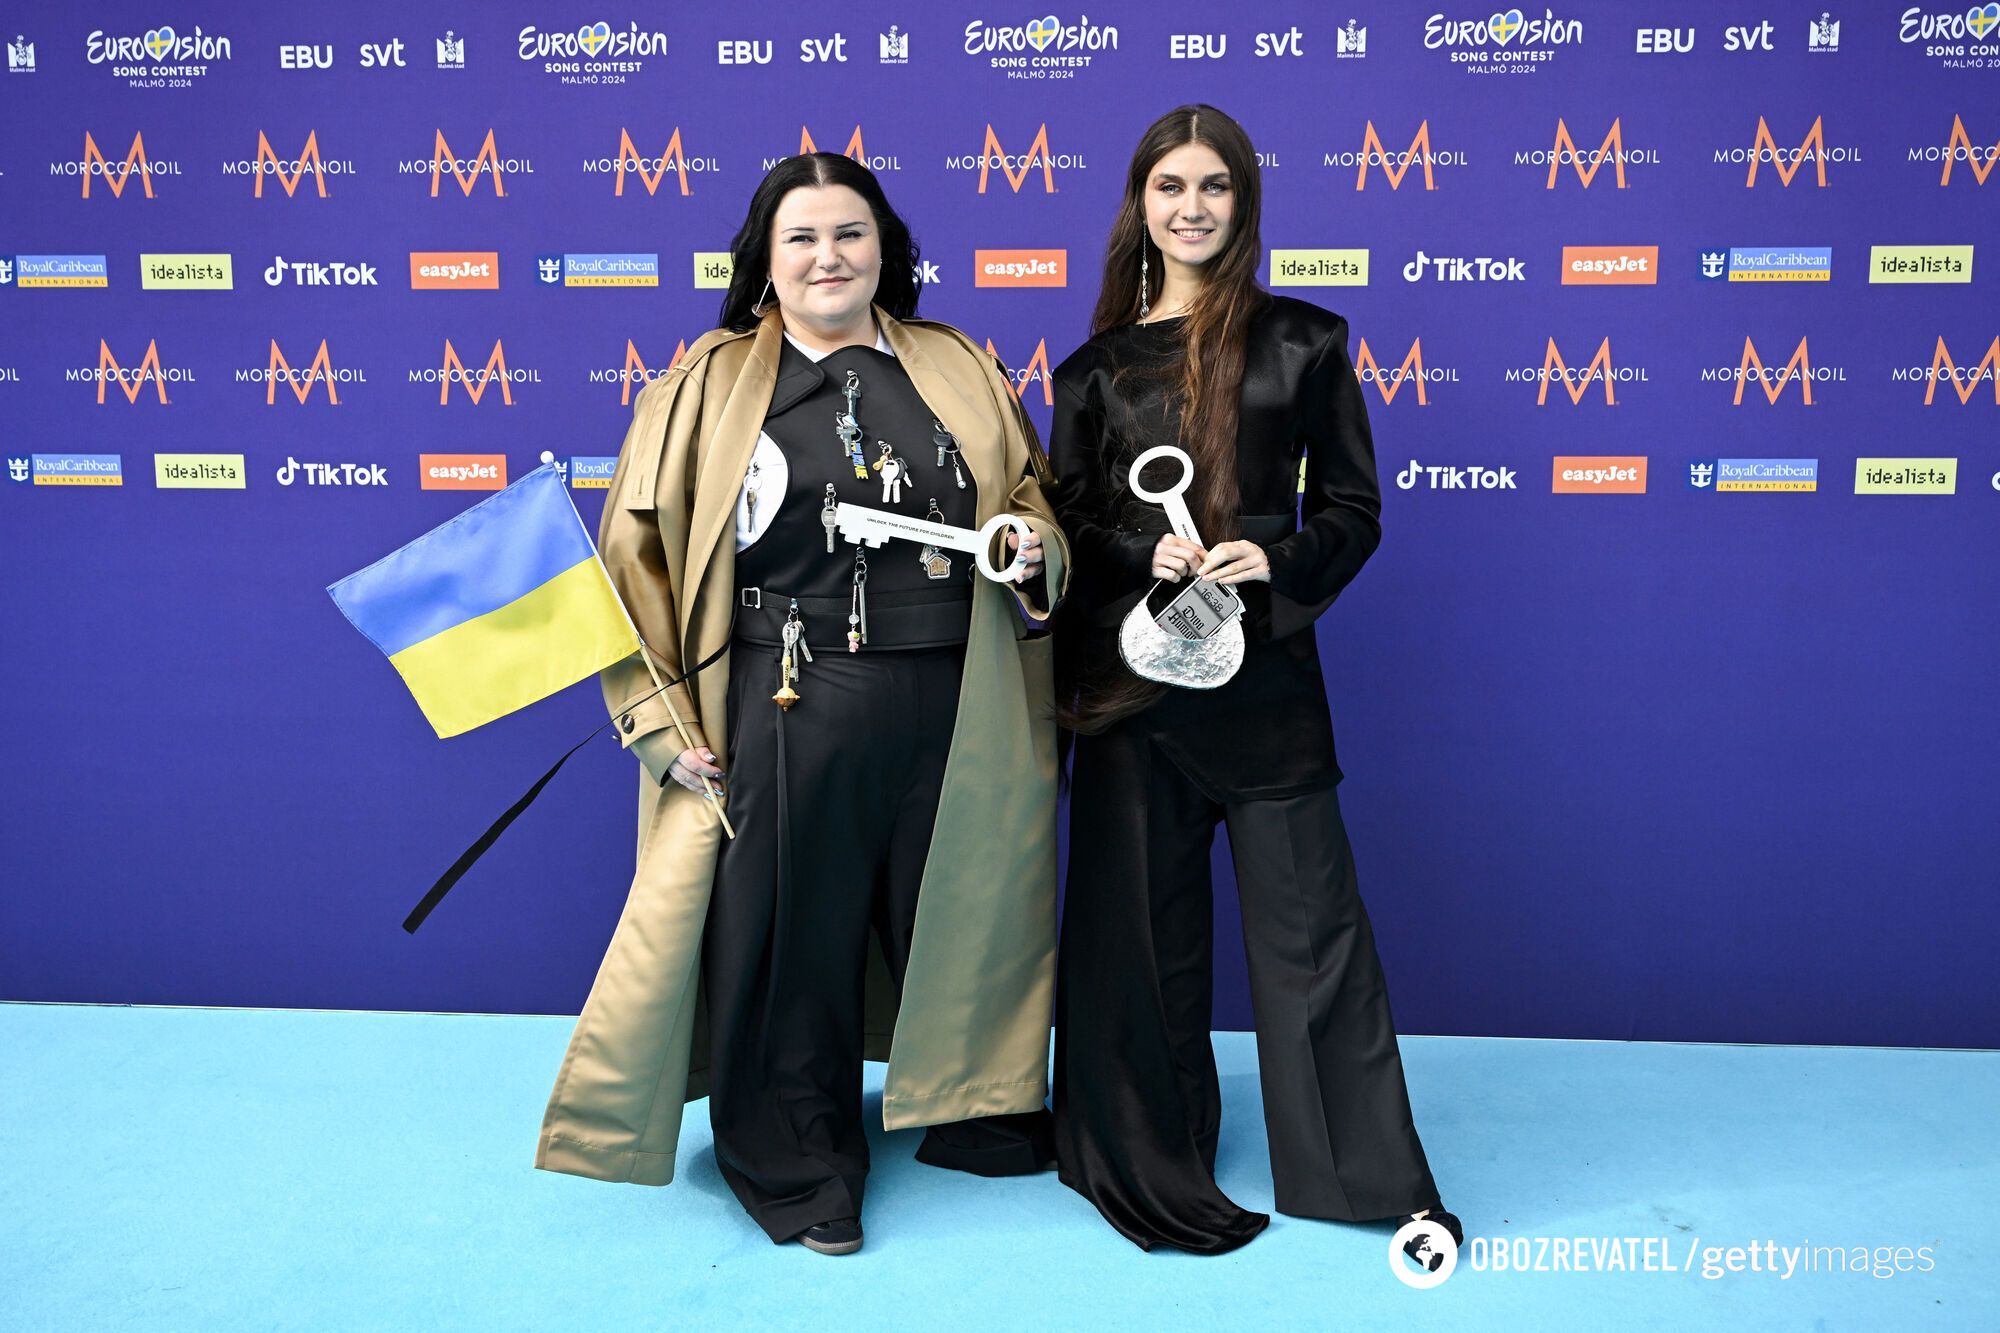 The opening ceremony of the Eurovision Song Contest 2024 took place in Malmö. Photos and videos